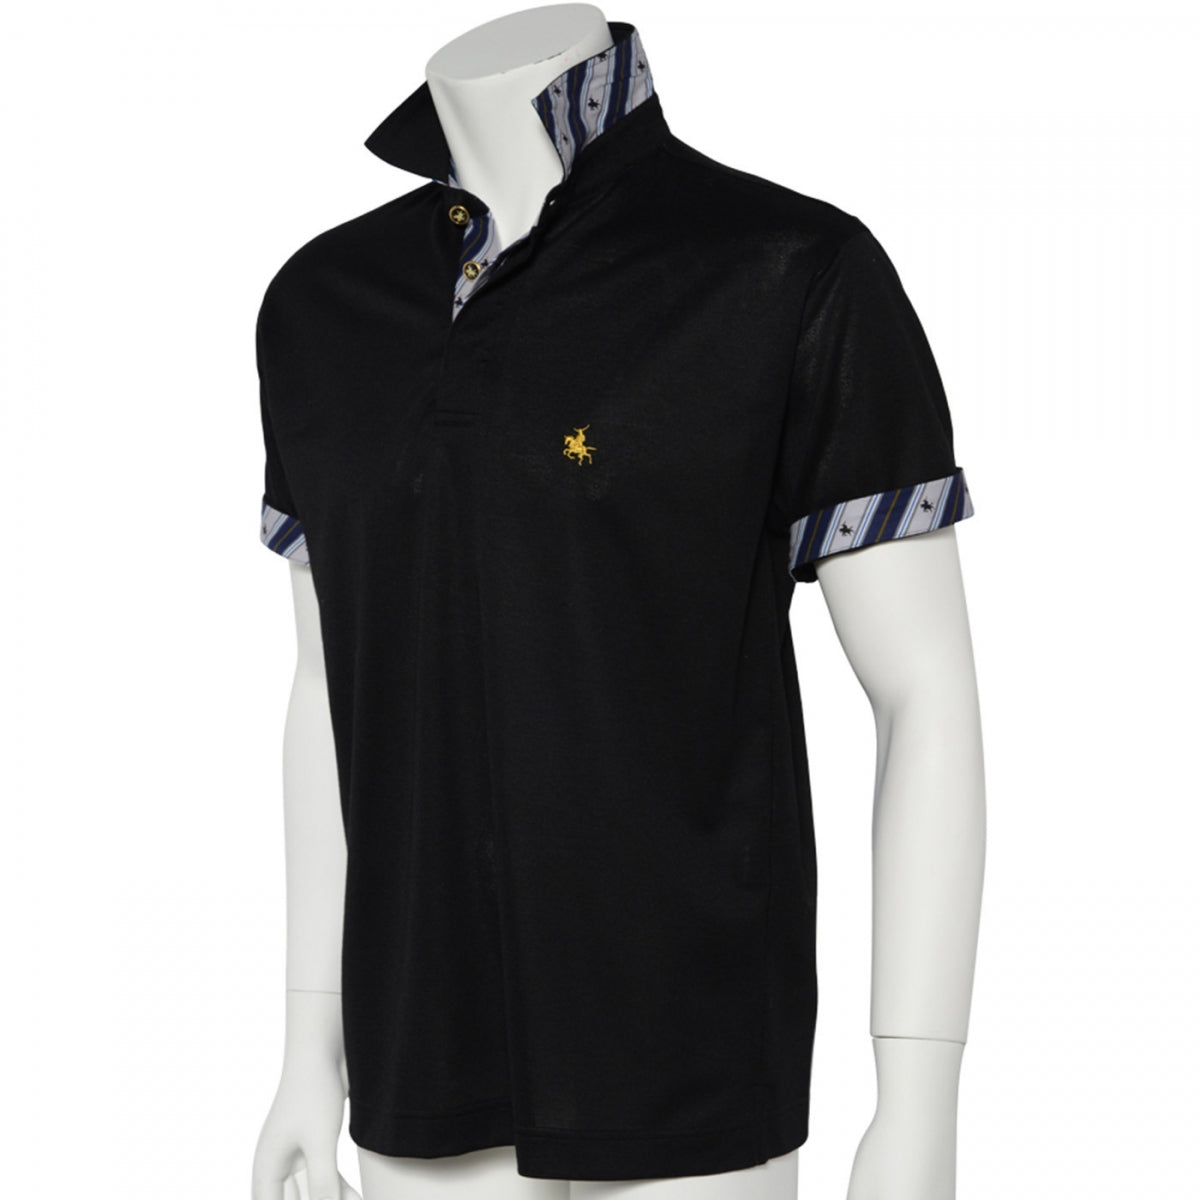 Men’s Short Sleeve Sports Polo Shirt -19. MASAMUNE Date Quick Dry Black Made in Japan FORTUNA Tokyo